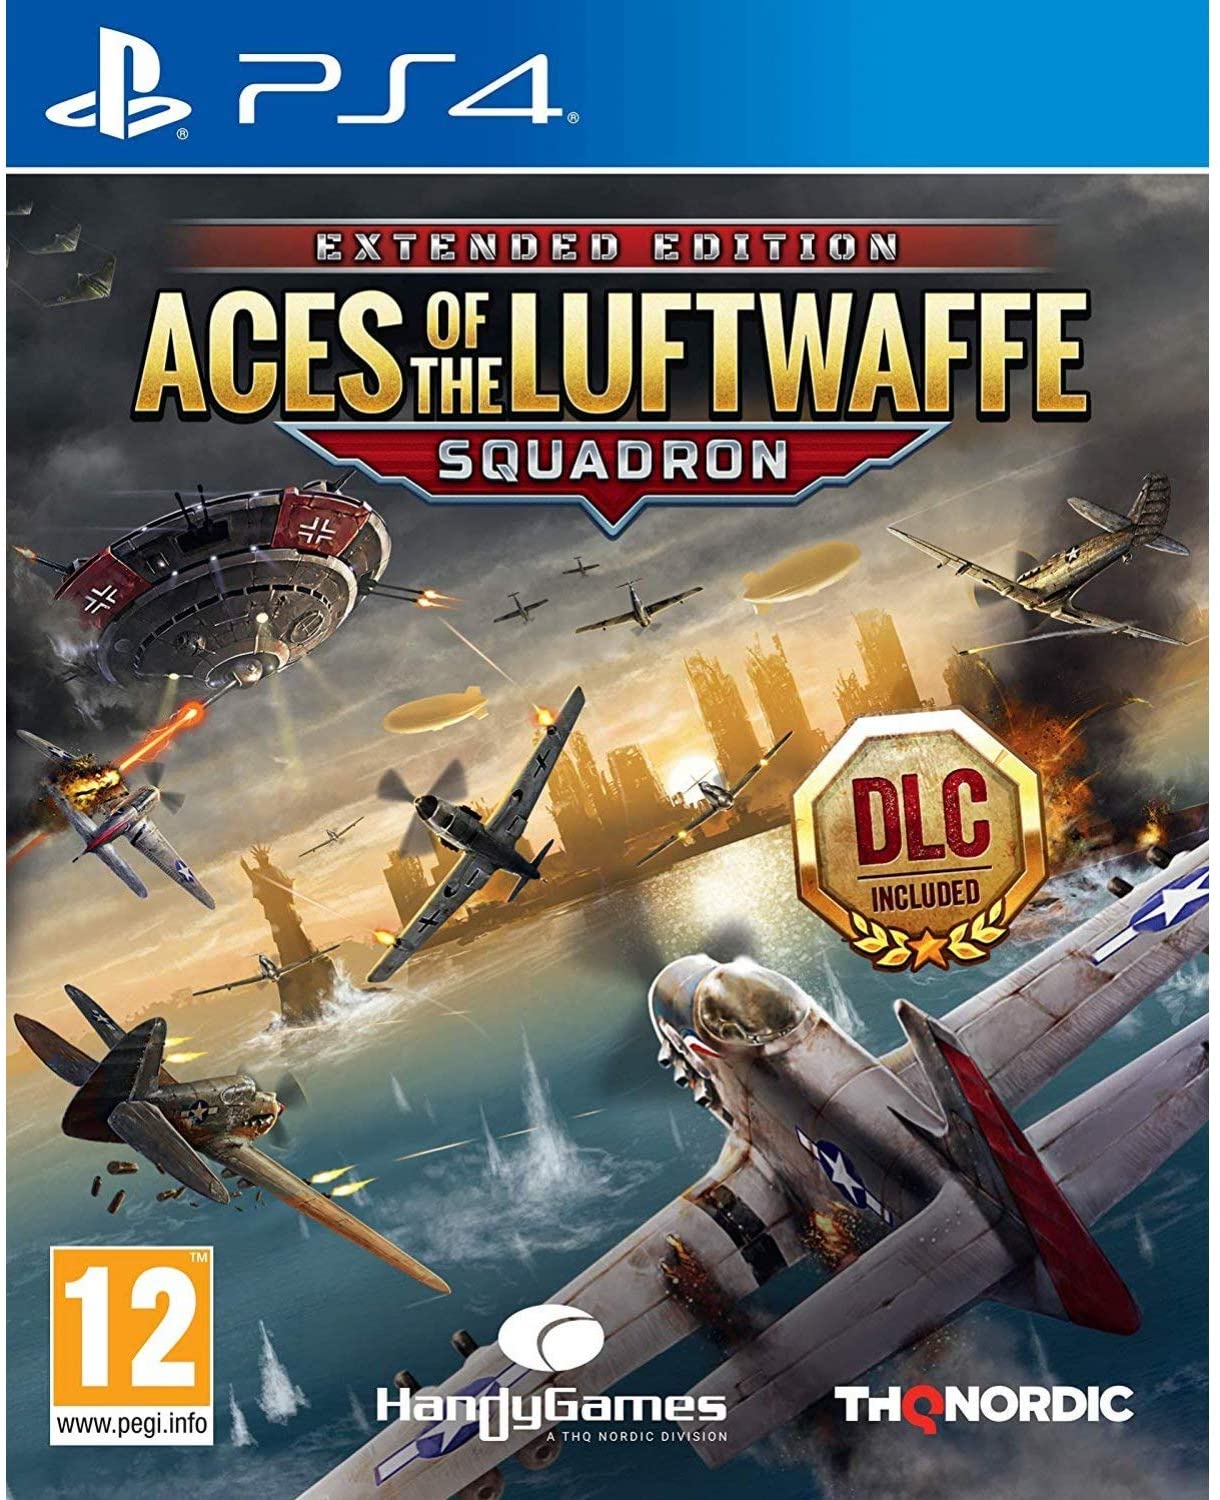 Aces of Luftwaffe Squadron Edition